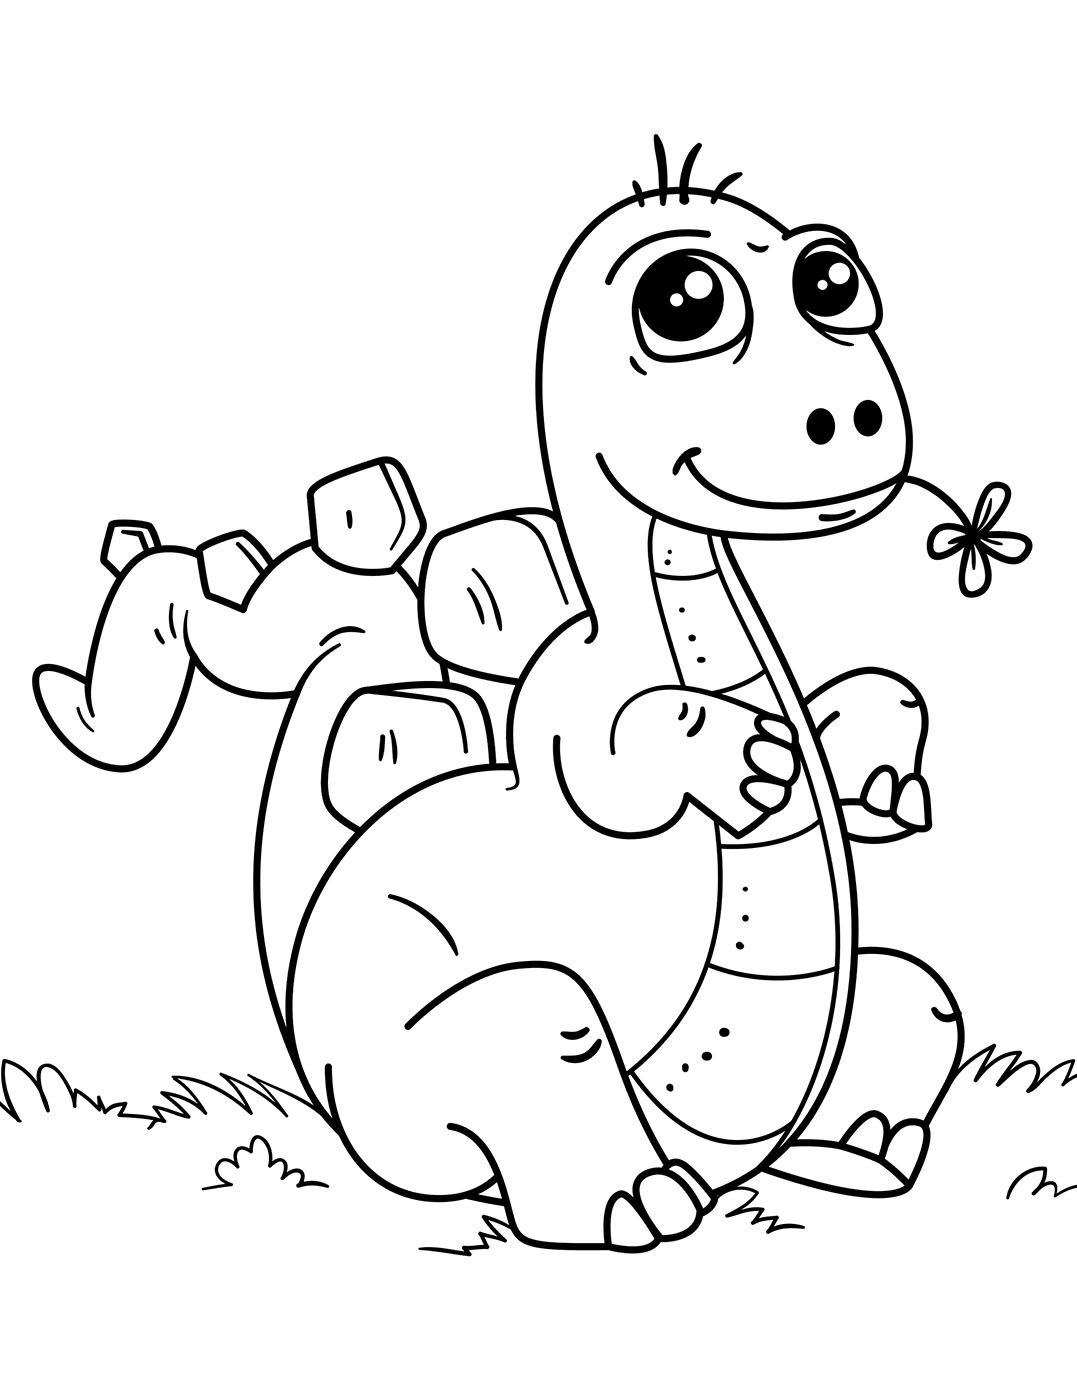 Download Dinosaurs To Color For Kids Ba Dinosaurs Kids Coloring Pages